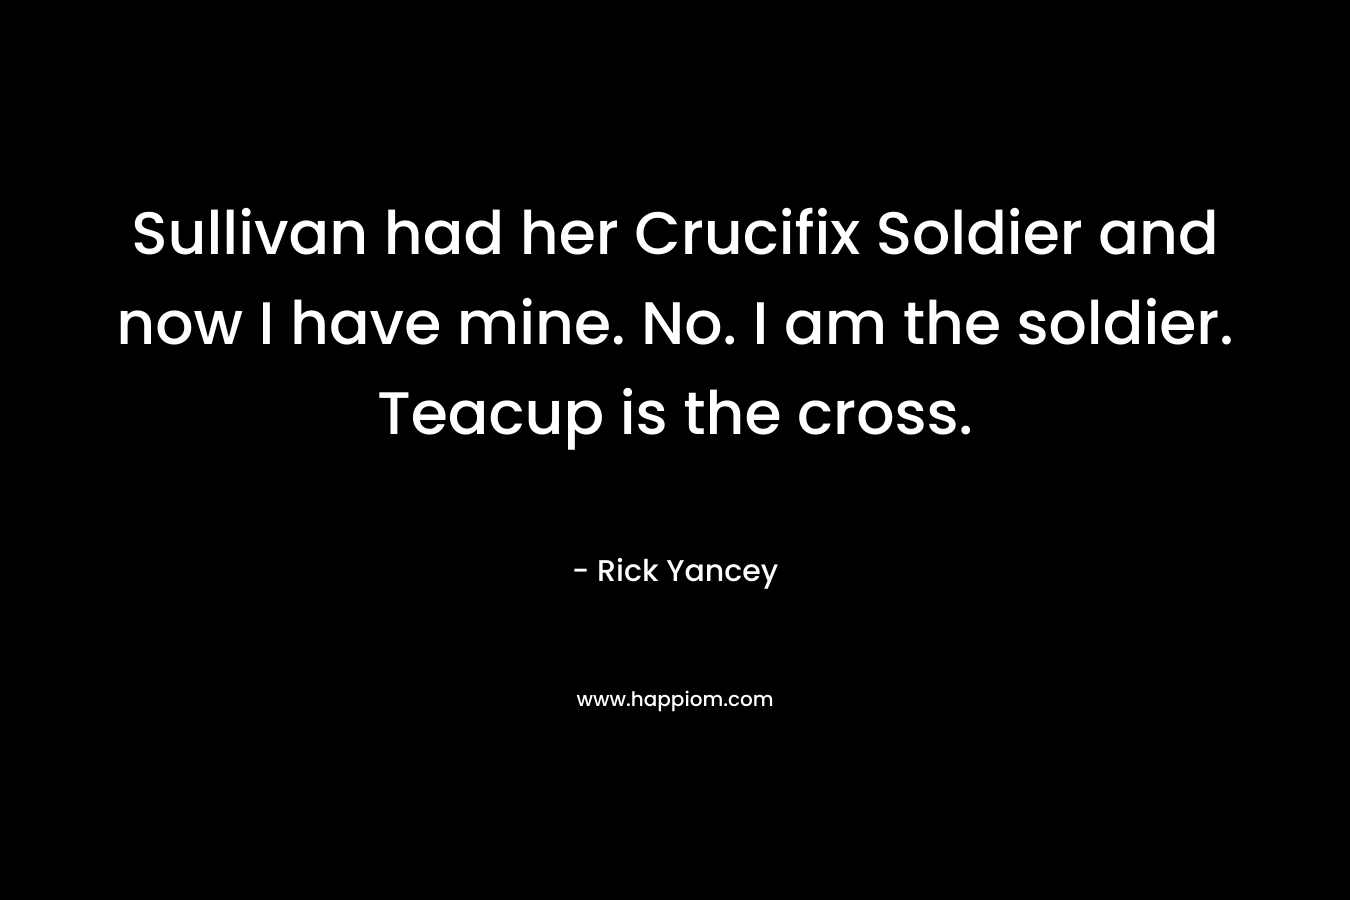 Sullivan had her Crucifix Soldier and now I have mine. No. I am the soldier. Teacup is the cross.